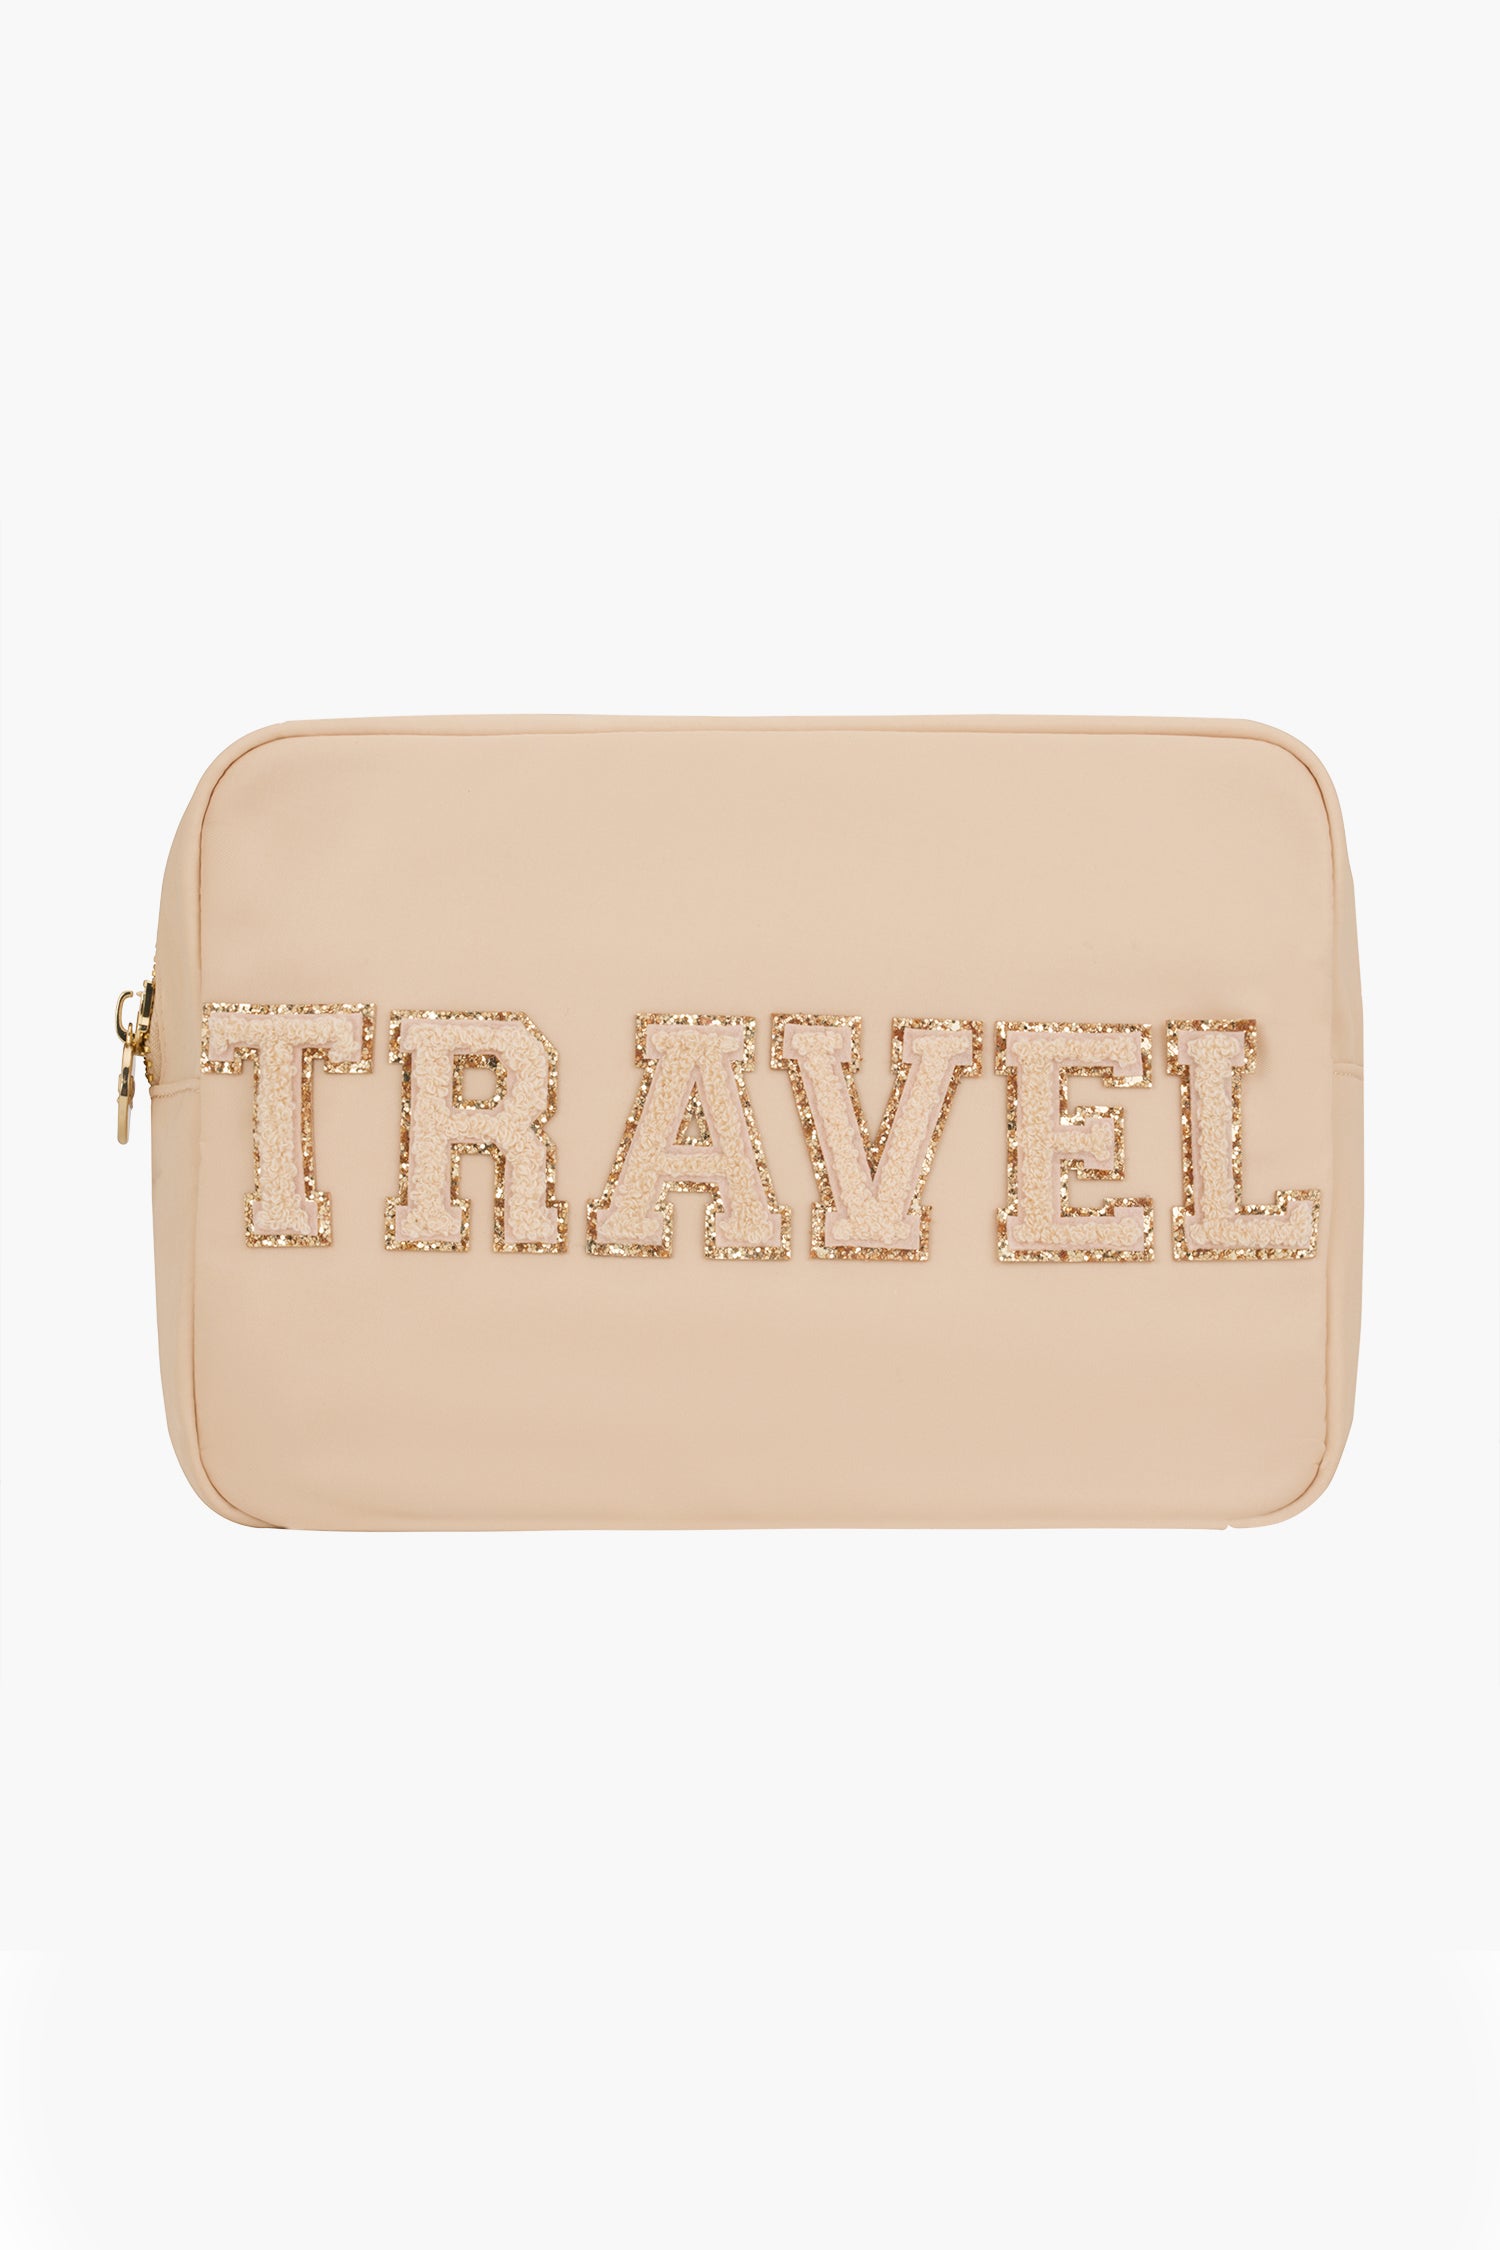 Stoney Clover Lane Clear Mini Pouch in Camel